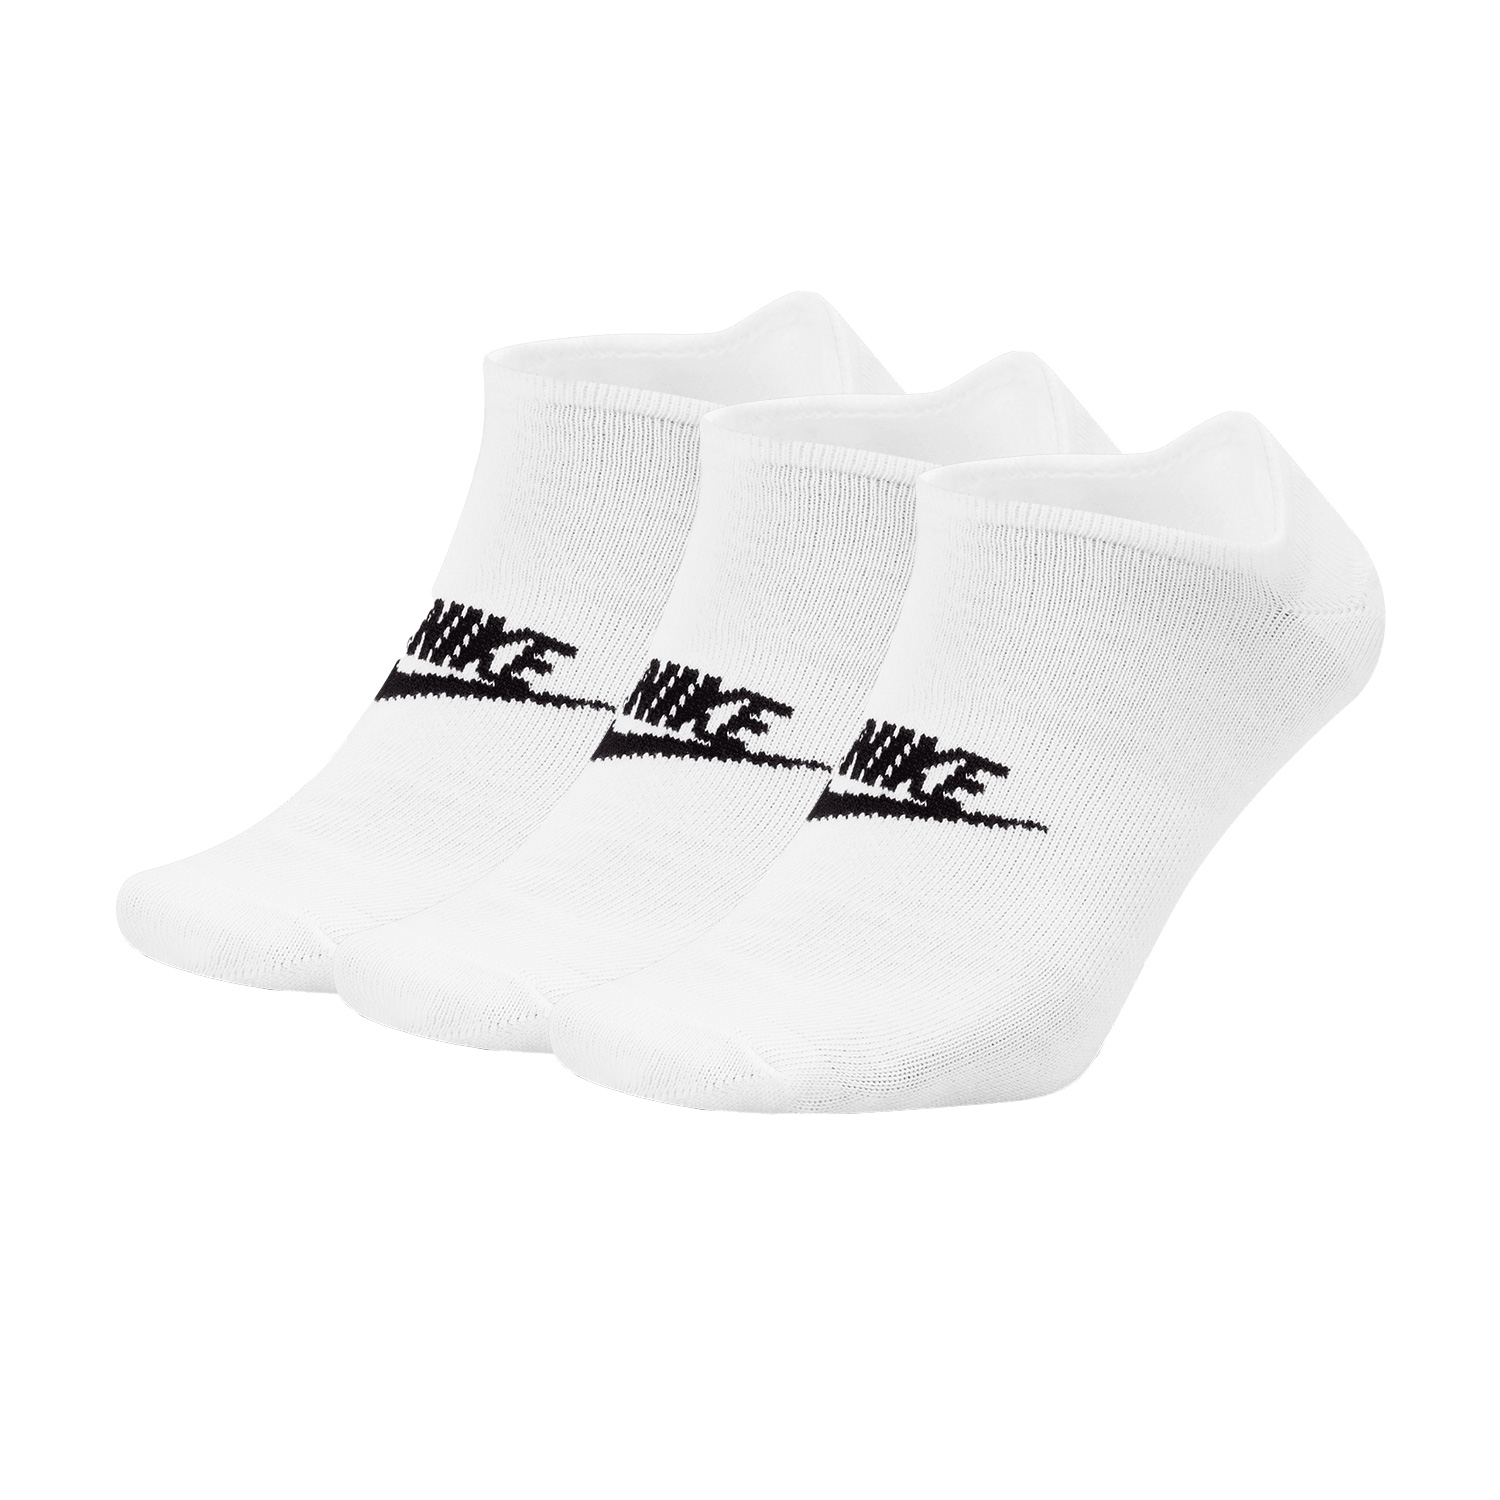 Nike Everyday Essential x 3 Calcetines - White/Black